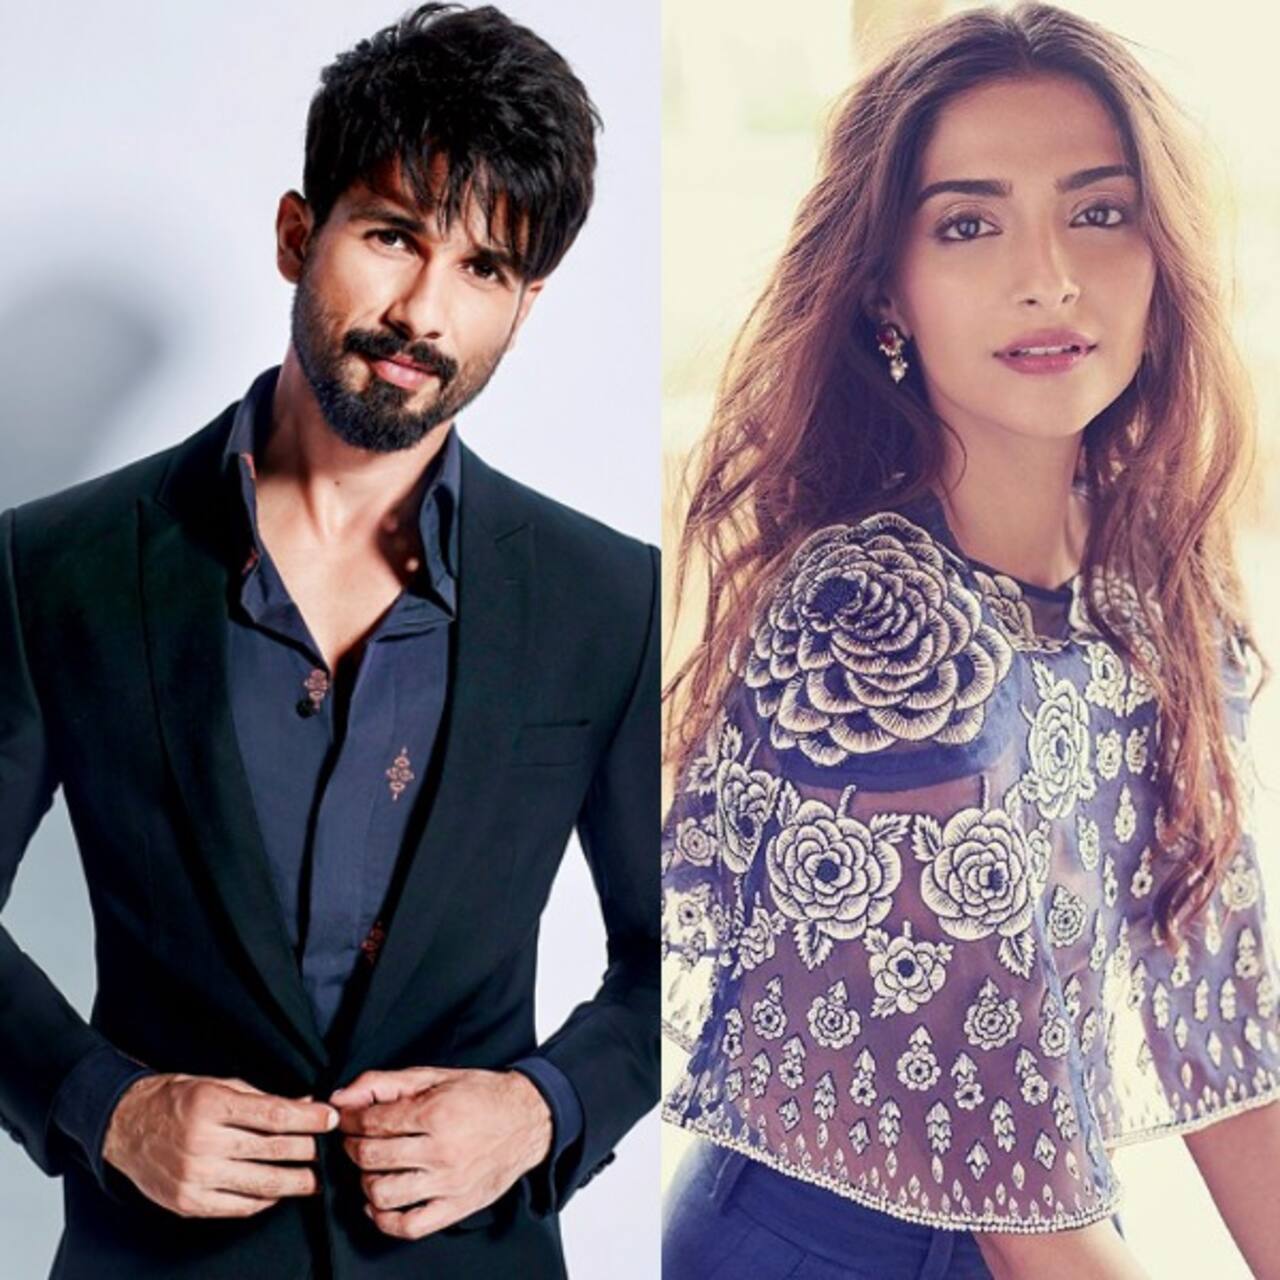 Sonam Kapoor on working after marriage: No one asked Shahid Kapoor, whether he will work or not after his wedding - watch video